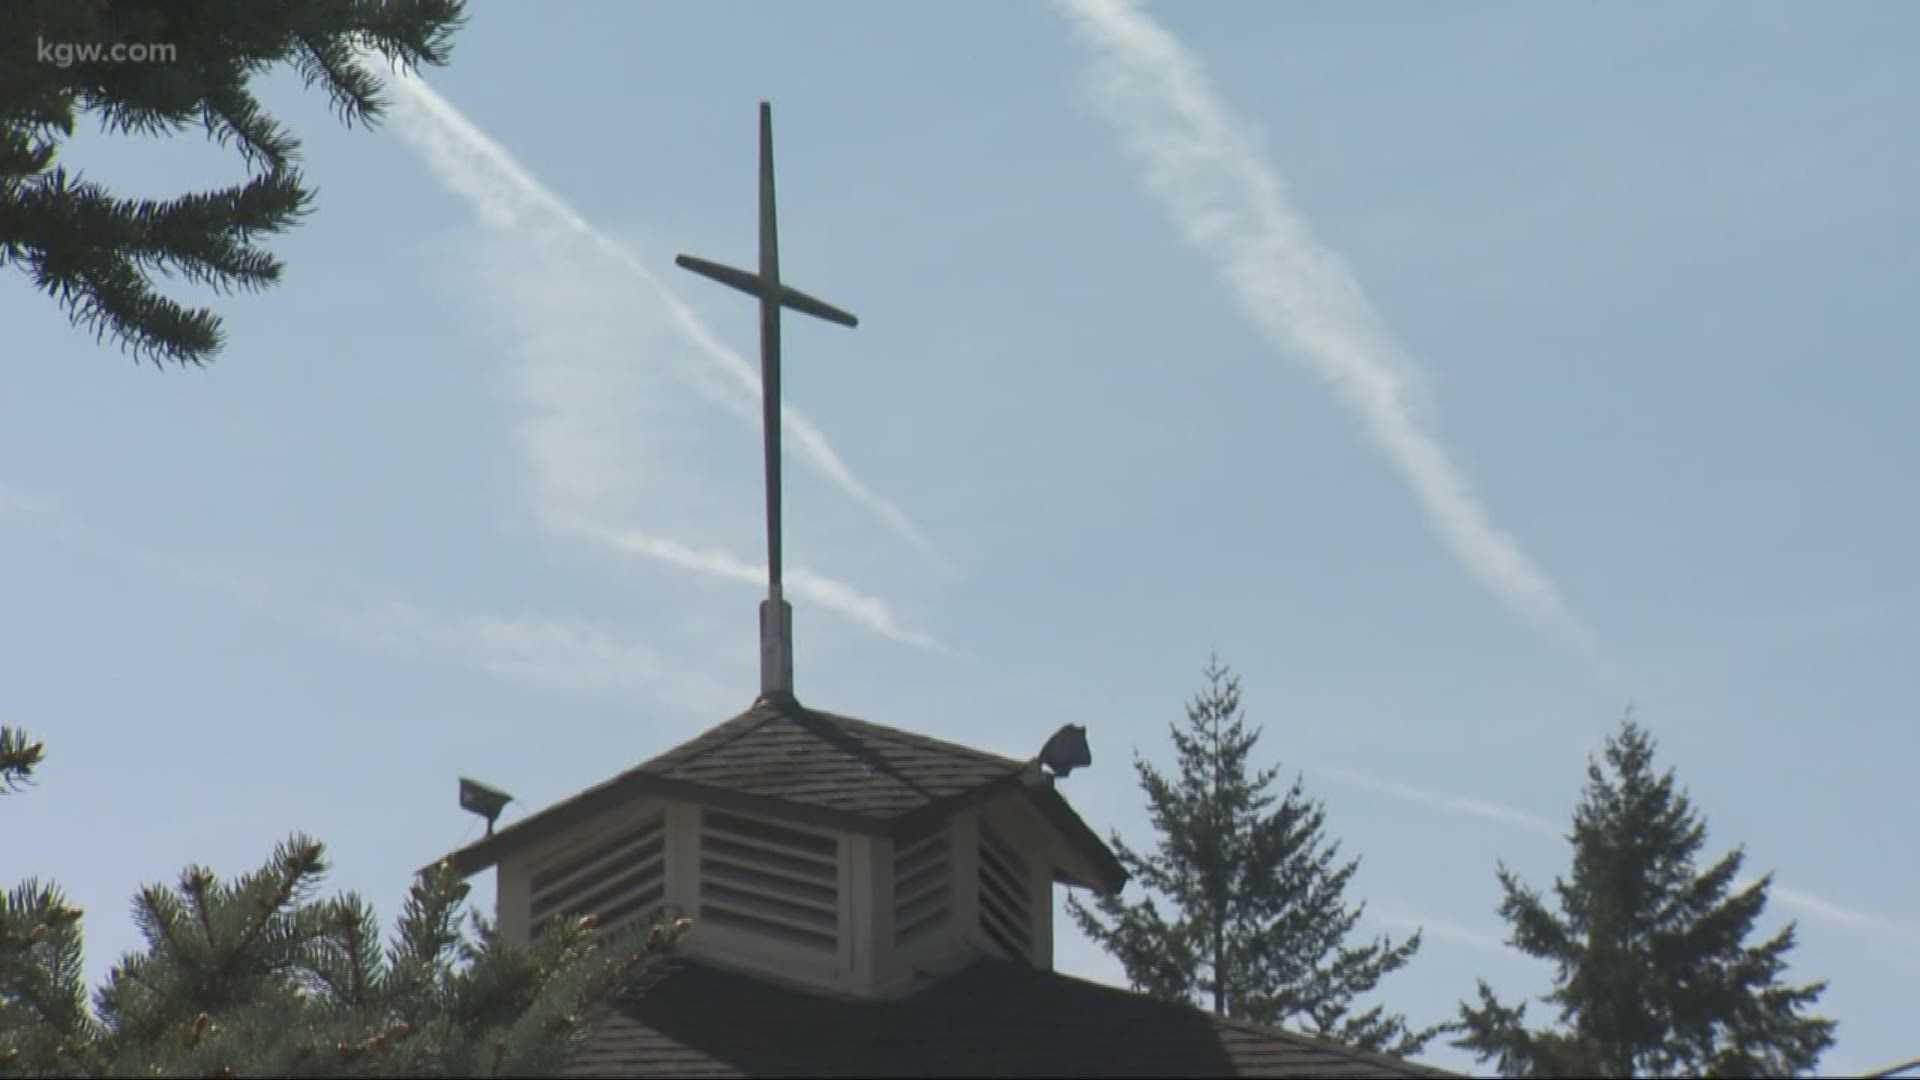 A Milwaukie church answers neighbors’ concerns about overnight homeless shelter.